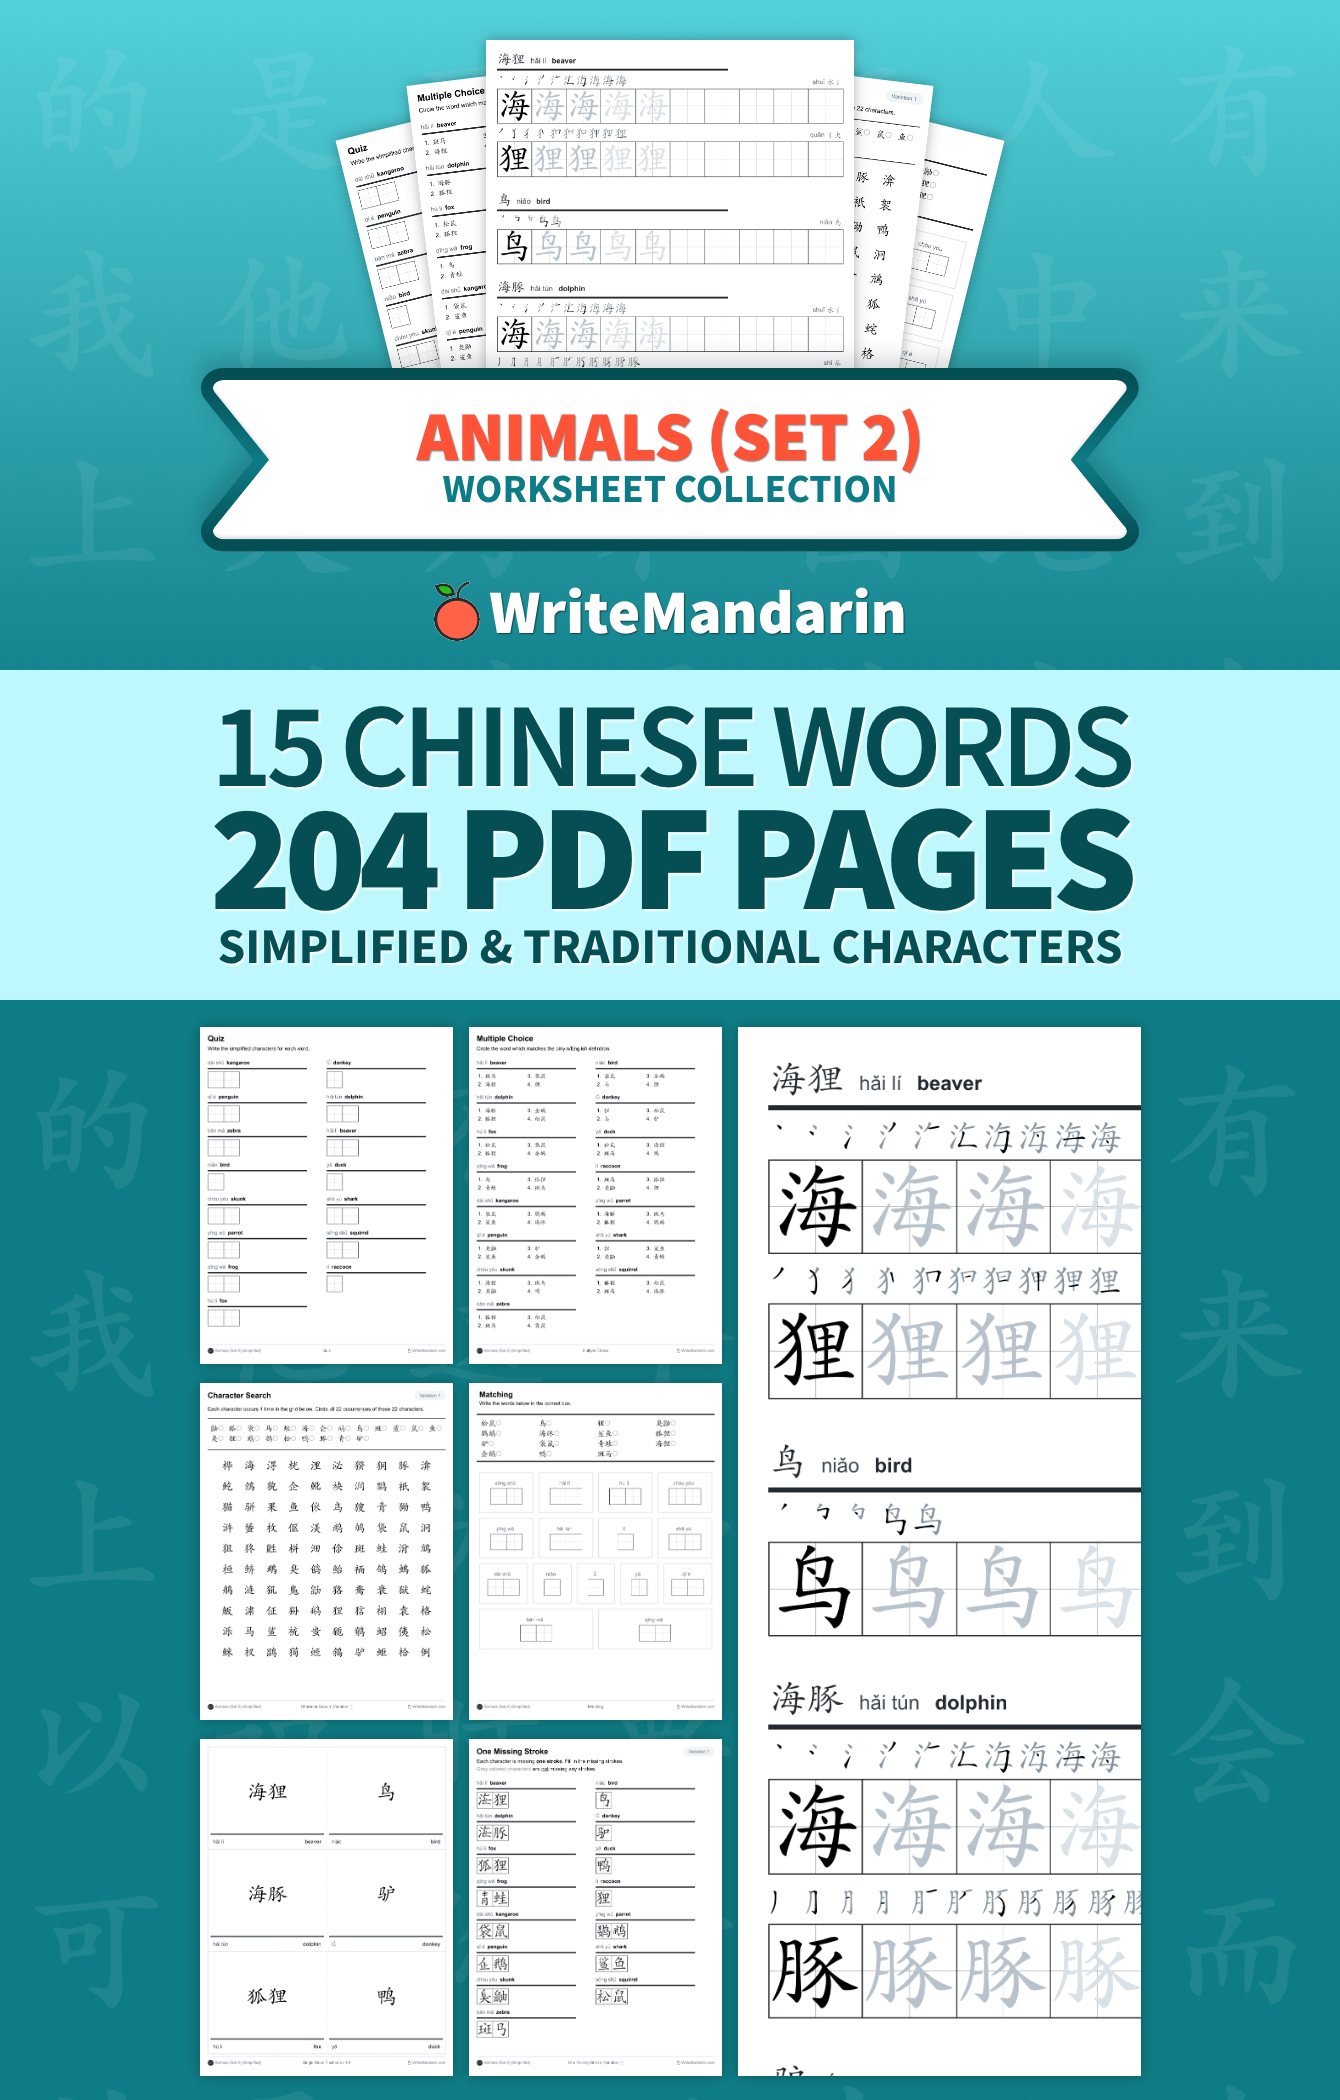 Preview image of Animals (Set 2) worksheet collection